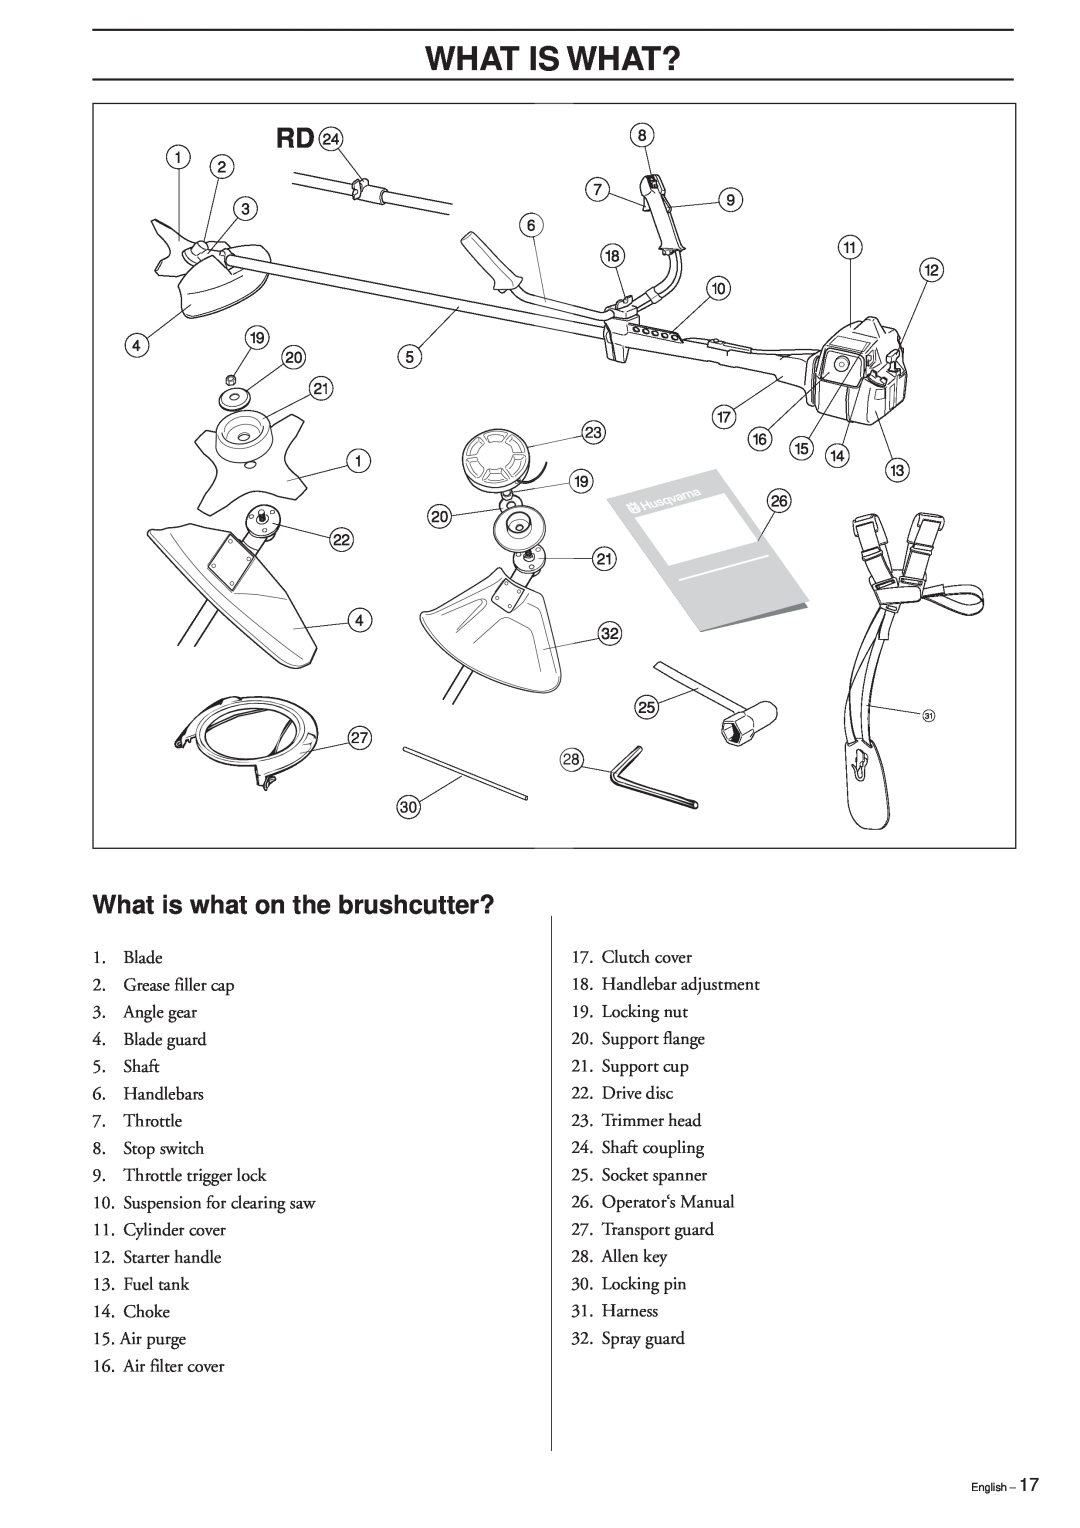 Husqvarna 225R, 225RD, 227R, 227RD, 232R, 232RD, 235R manual What Is What?, What is what on the brushcutter? 